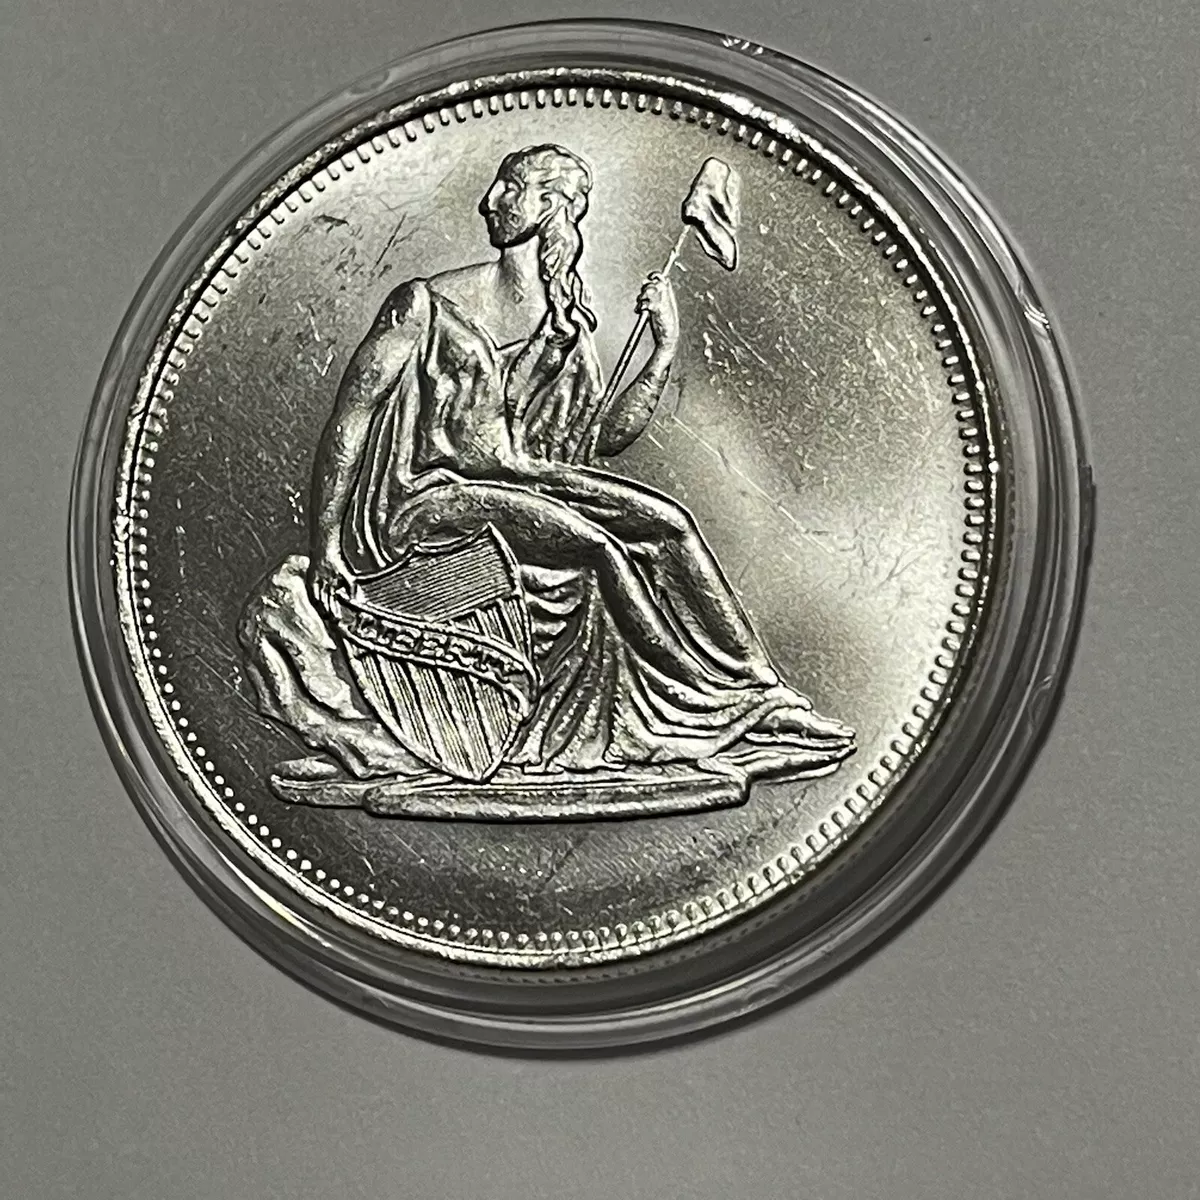 Compare 1 oz Walking Liberty Silver Round dealer prices